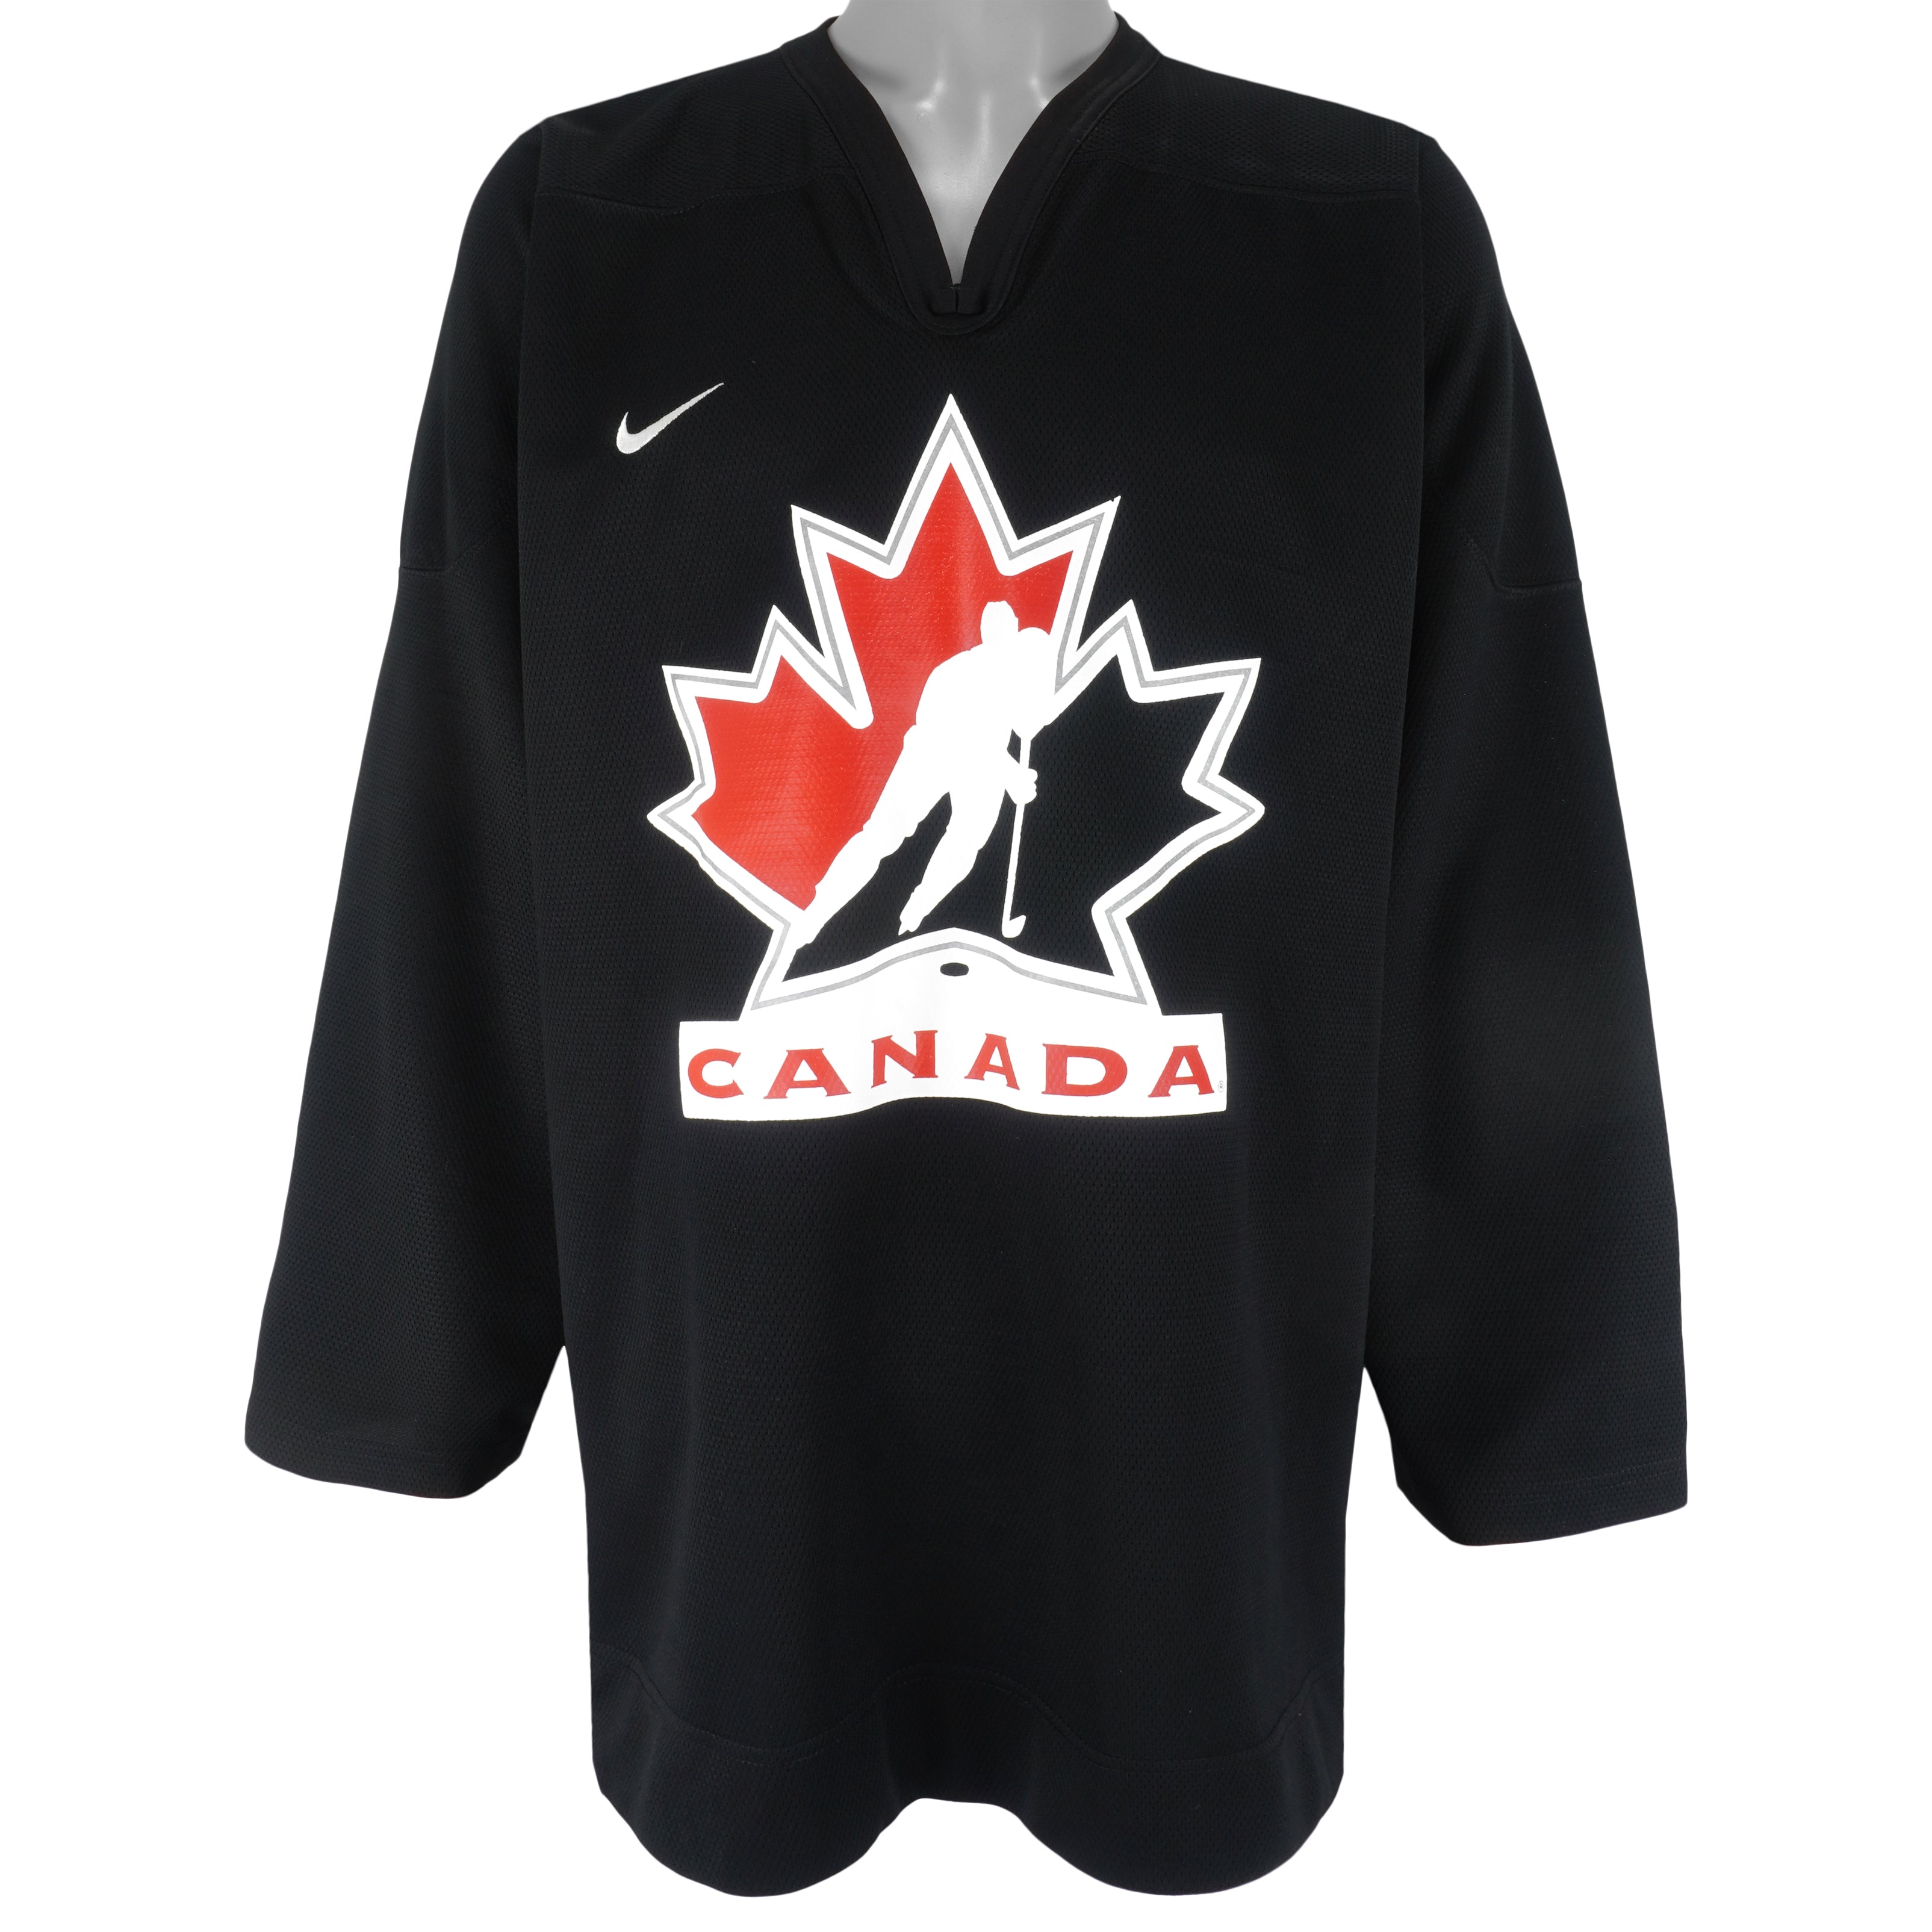 Hudson's Bay: Nike Team Canada Olympic Jersey for $120